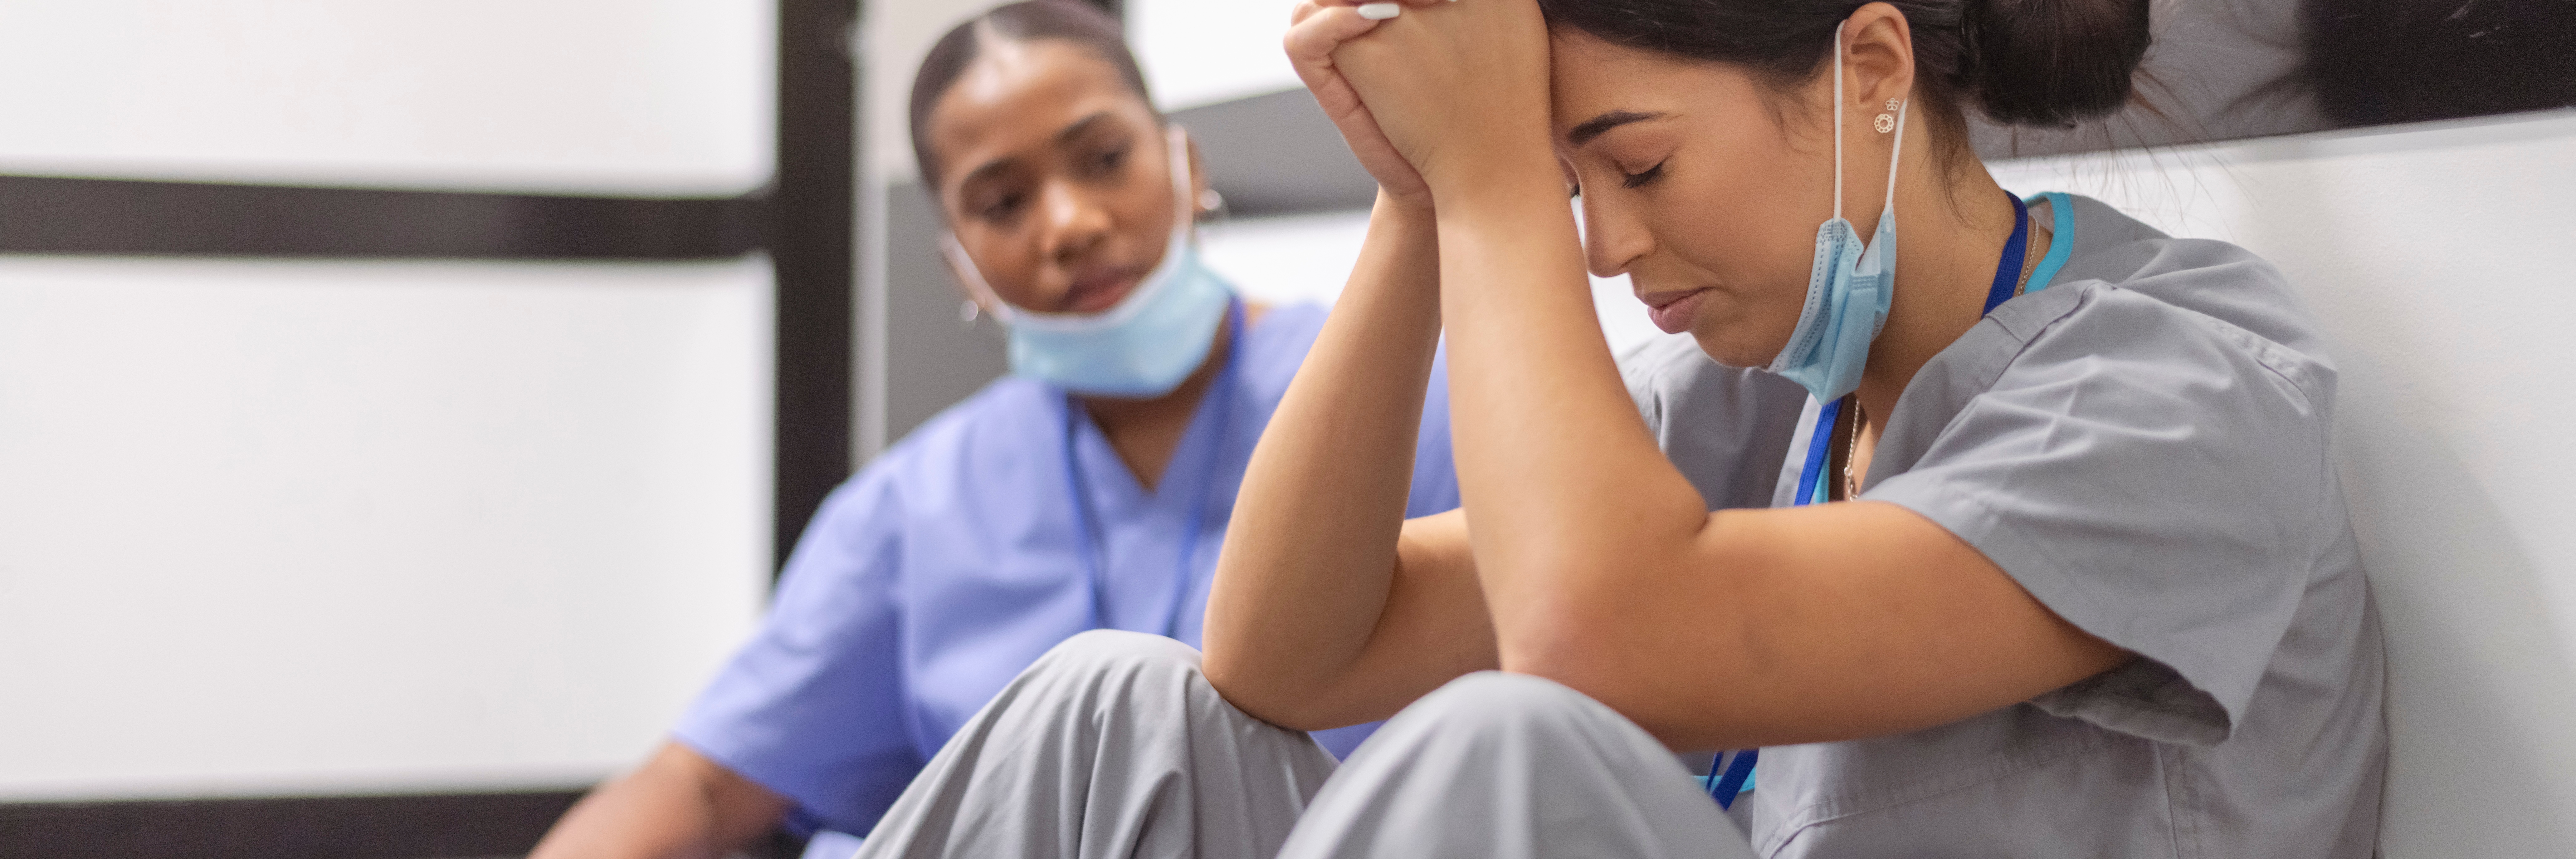 Understaffed and overworked: addressing healthcare labor shortage risks